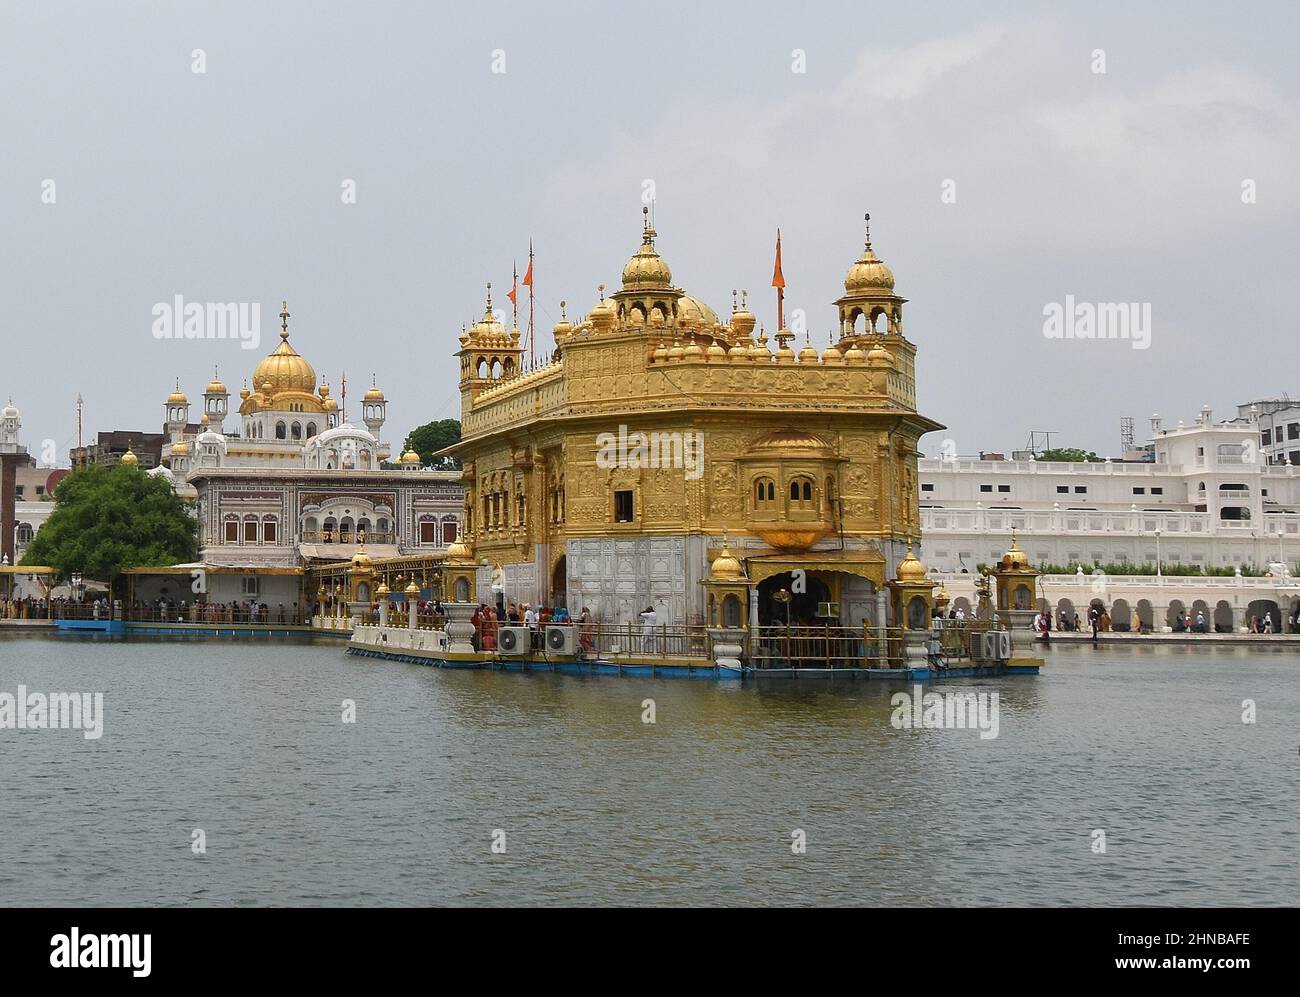 Amritsar, Punjab, India- August 7, 2019- The Golden Temple Complex where the Sikh Golden Temple is located and is the most visited place on Earth. Stock Photo